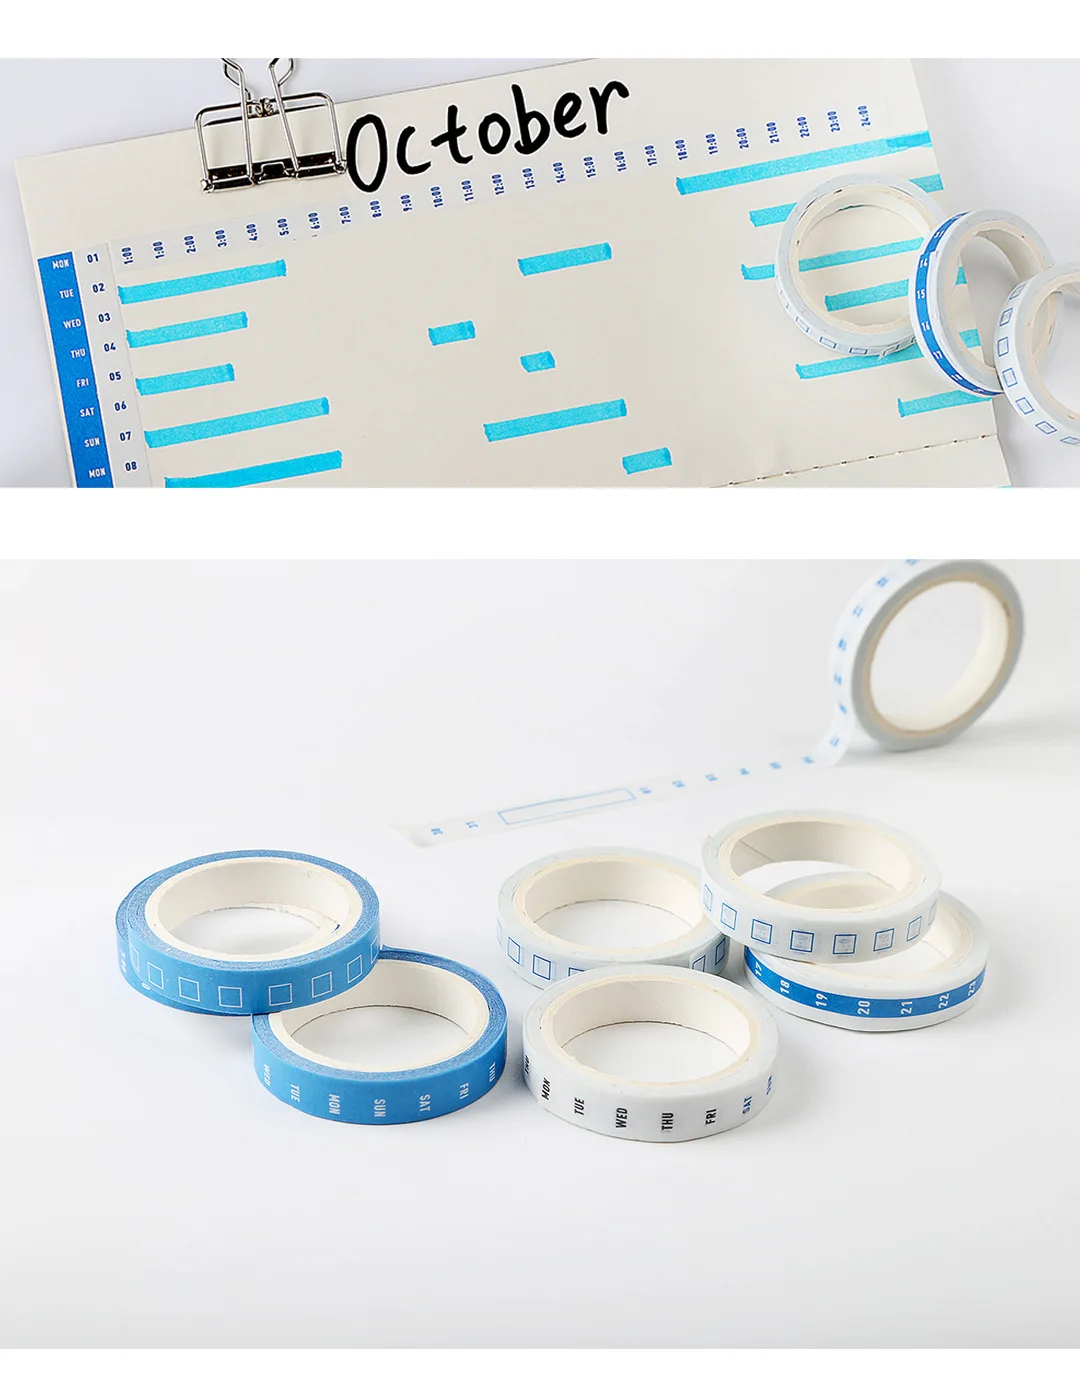 4 pcs / set Adhesive Tape Practical Week Plan Time Axis Schedule Lattice Masking Tape Diary Decorative Sticker Cute Stationery